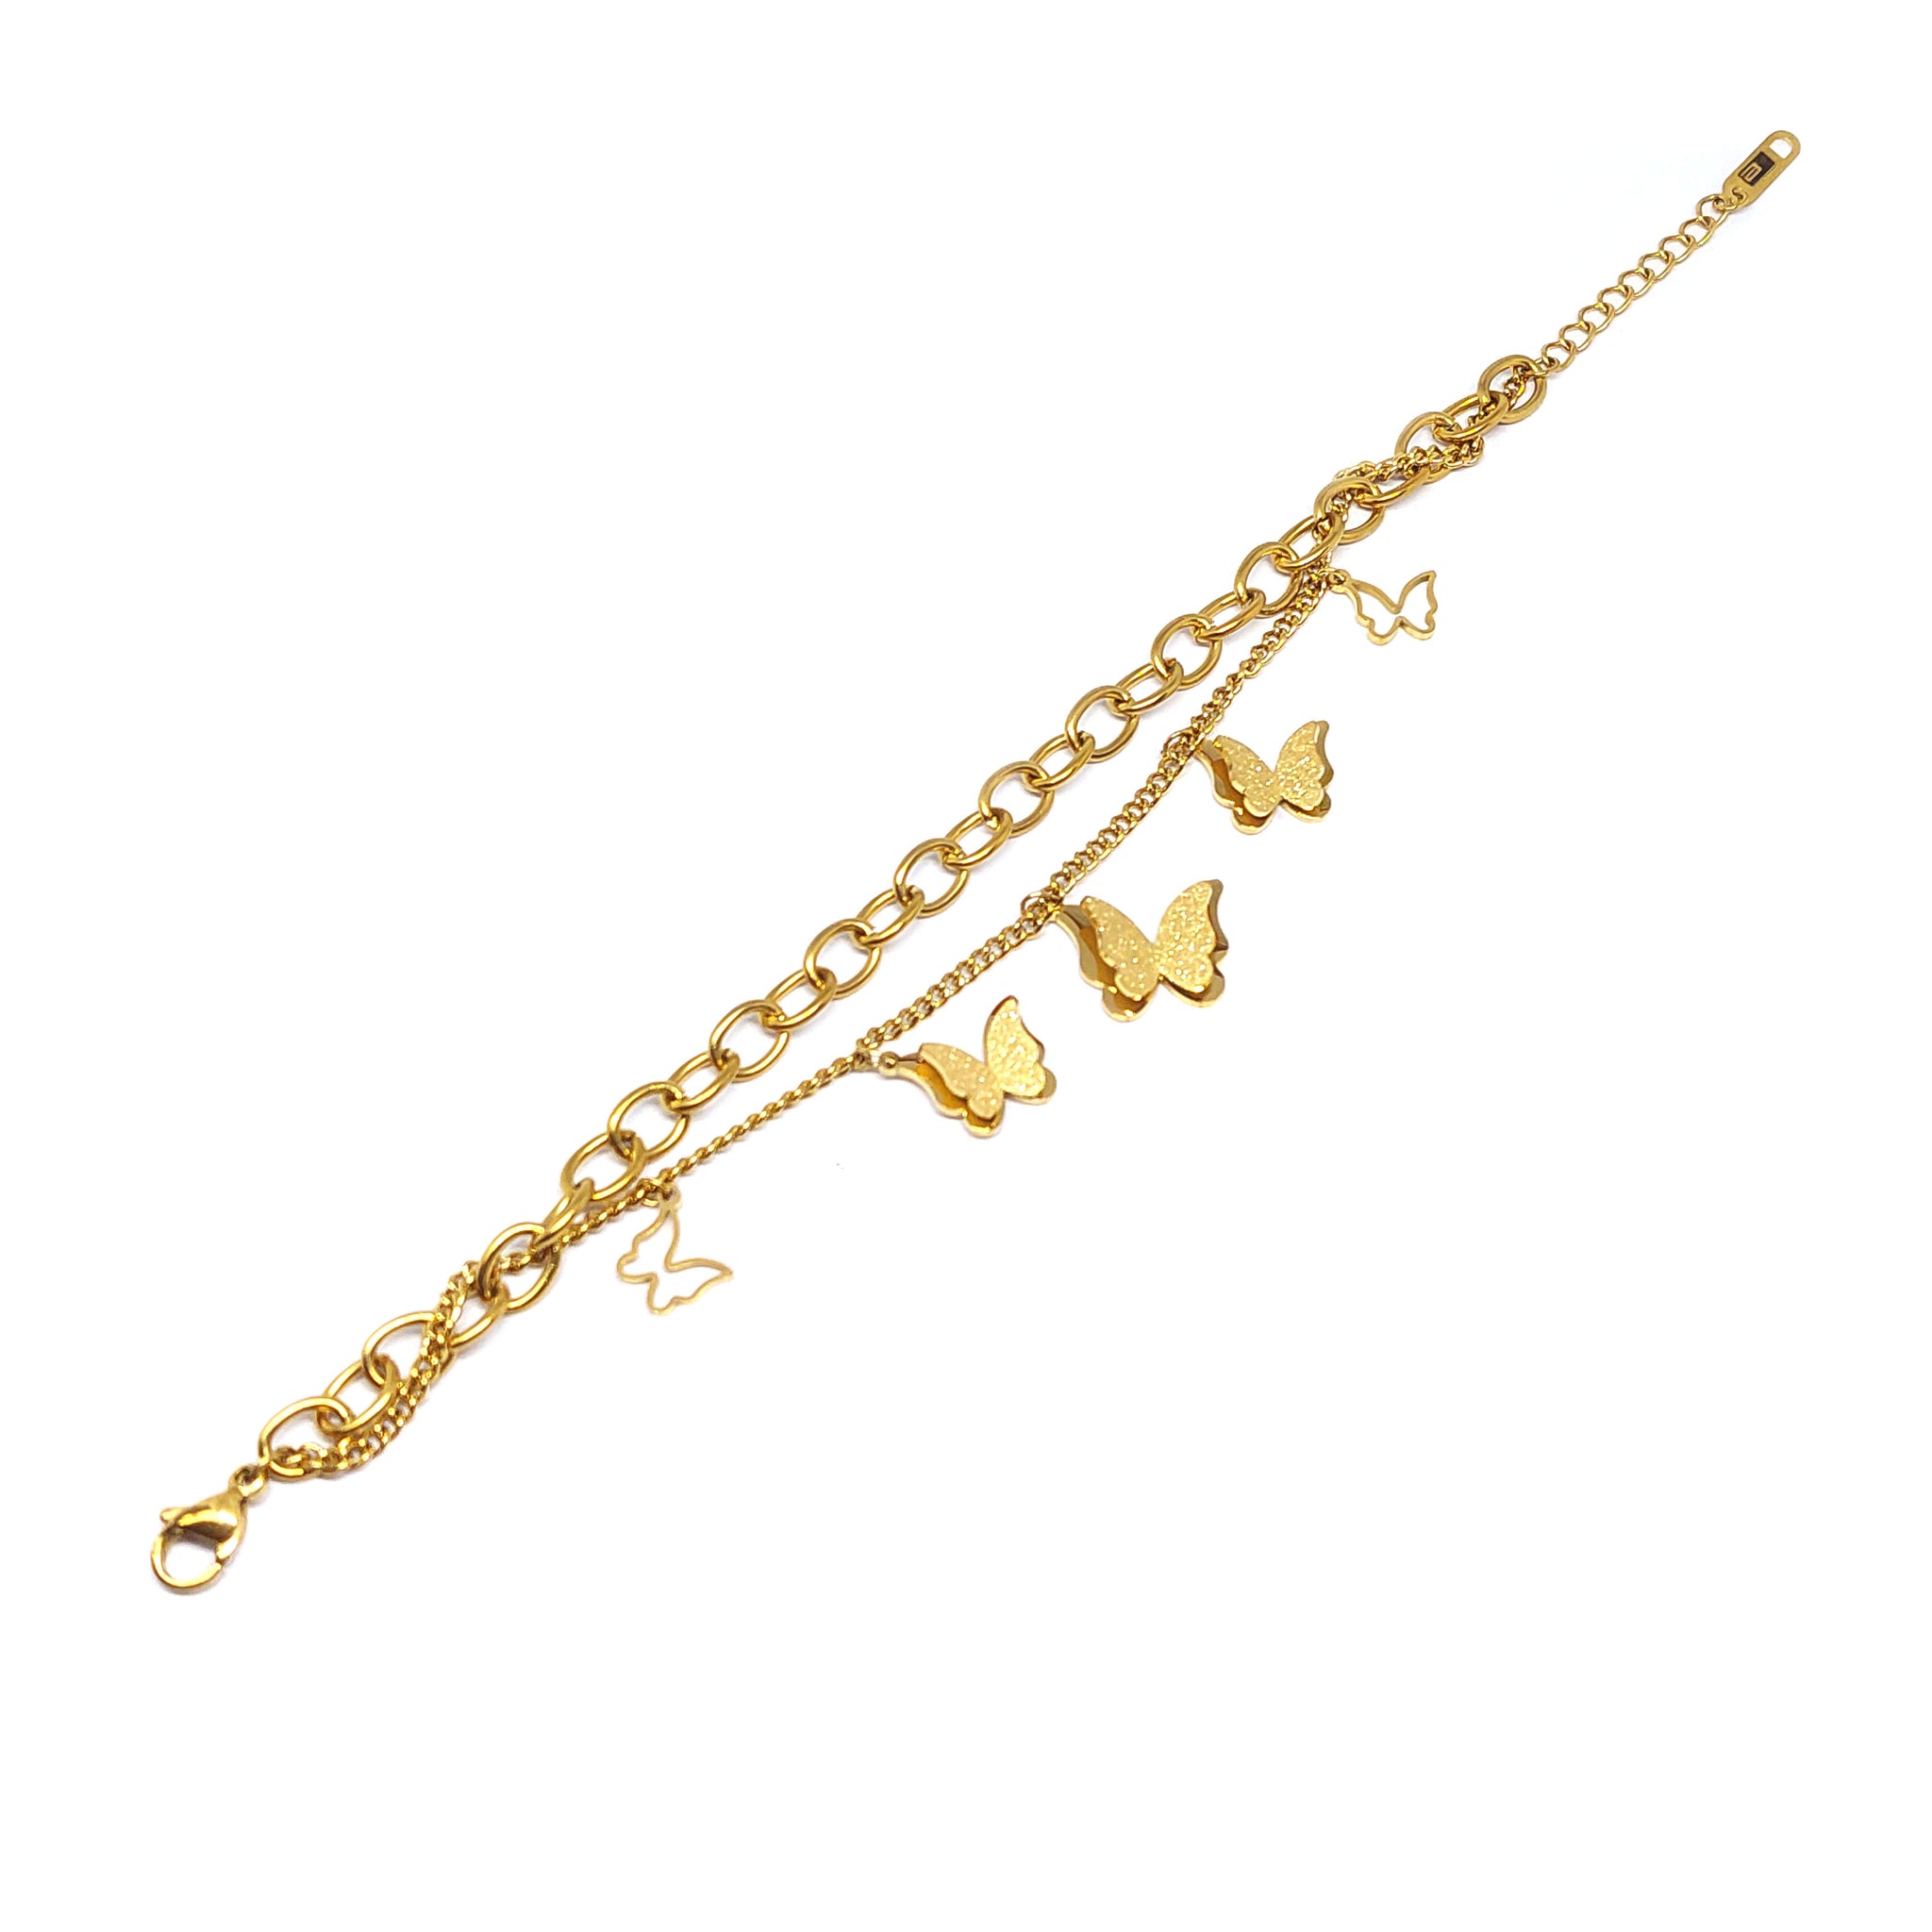 ESBL 7837: Gold-Plated Double SB Butterfly & Chain Bracelet